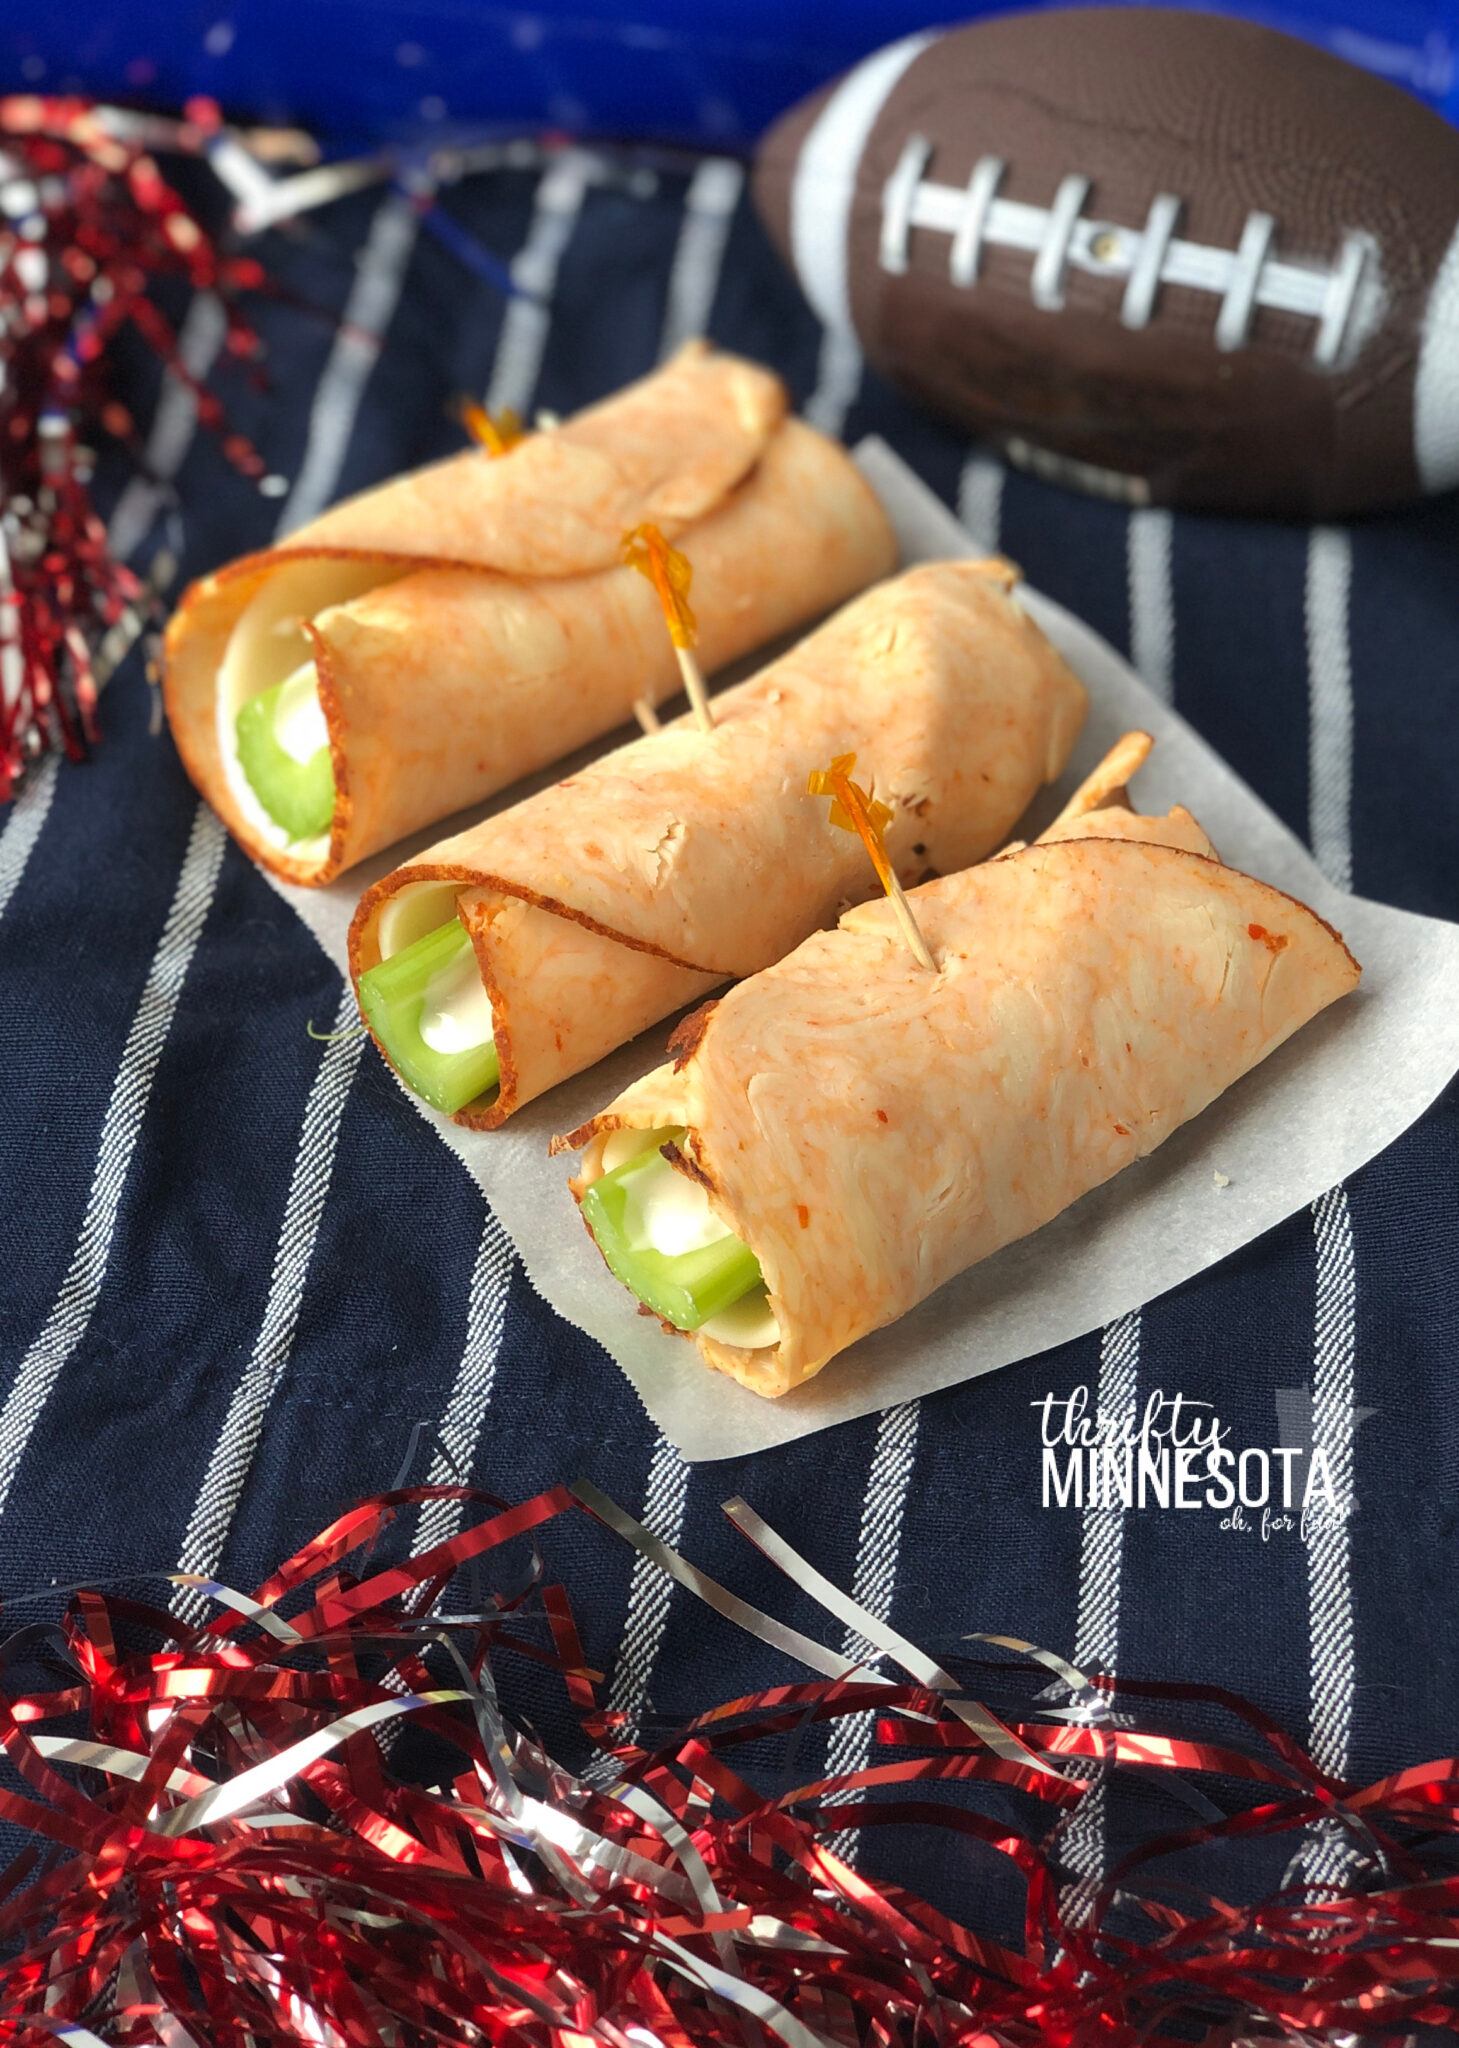 Buffalo Chicken Roll-Ups Recipe for the Big Game - Thrifty Minnesota